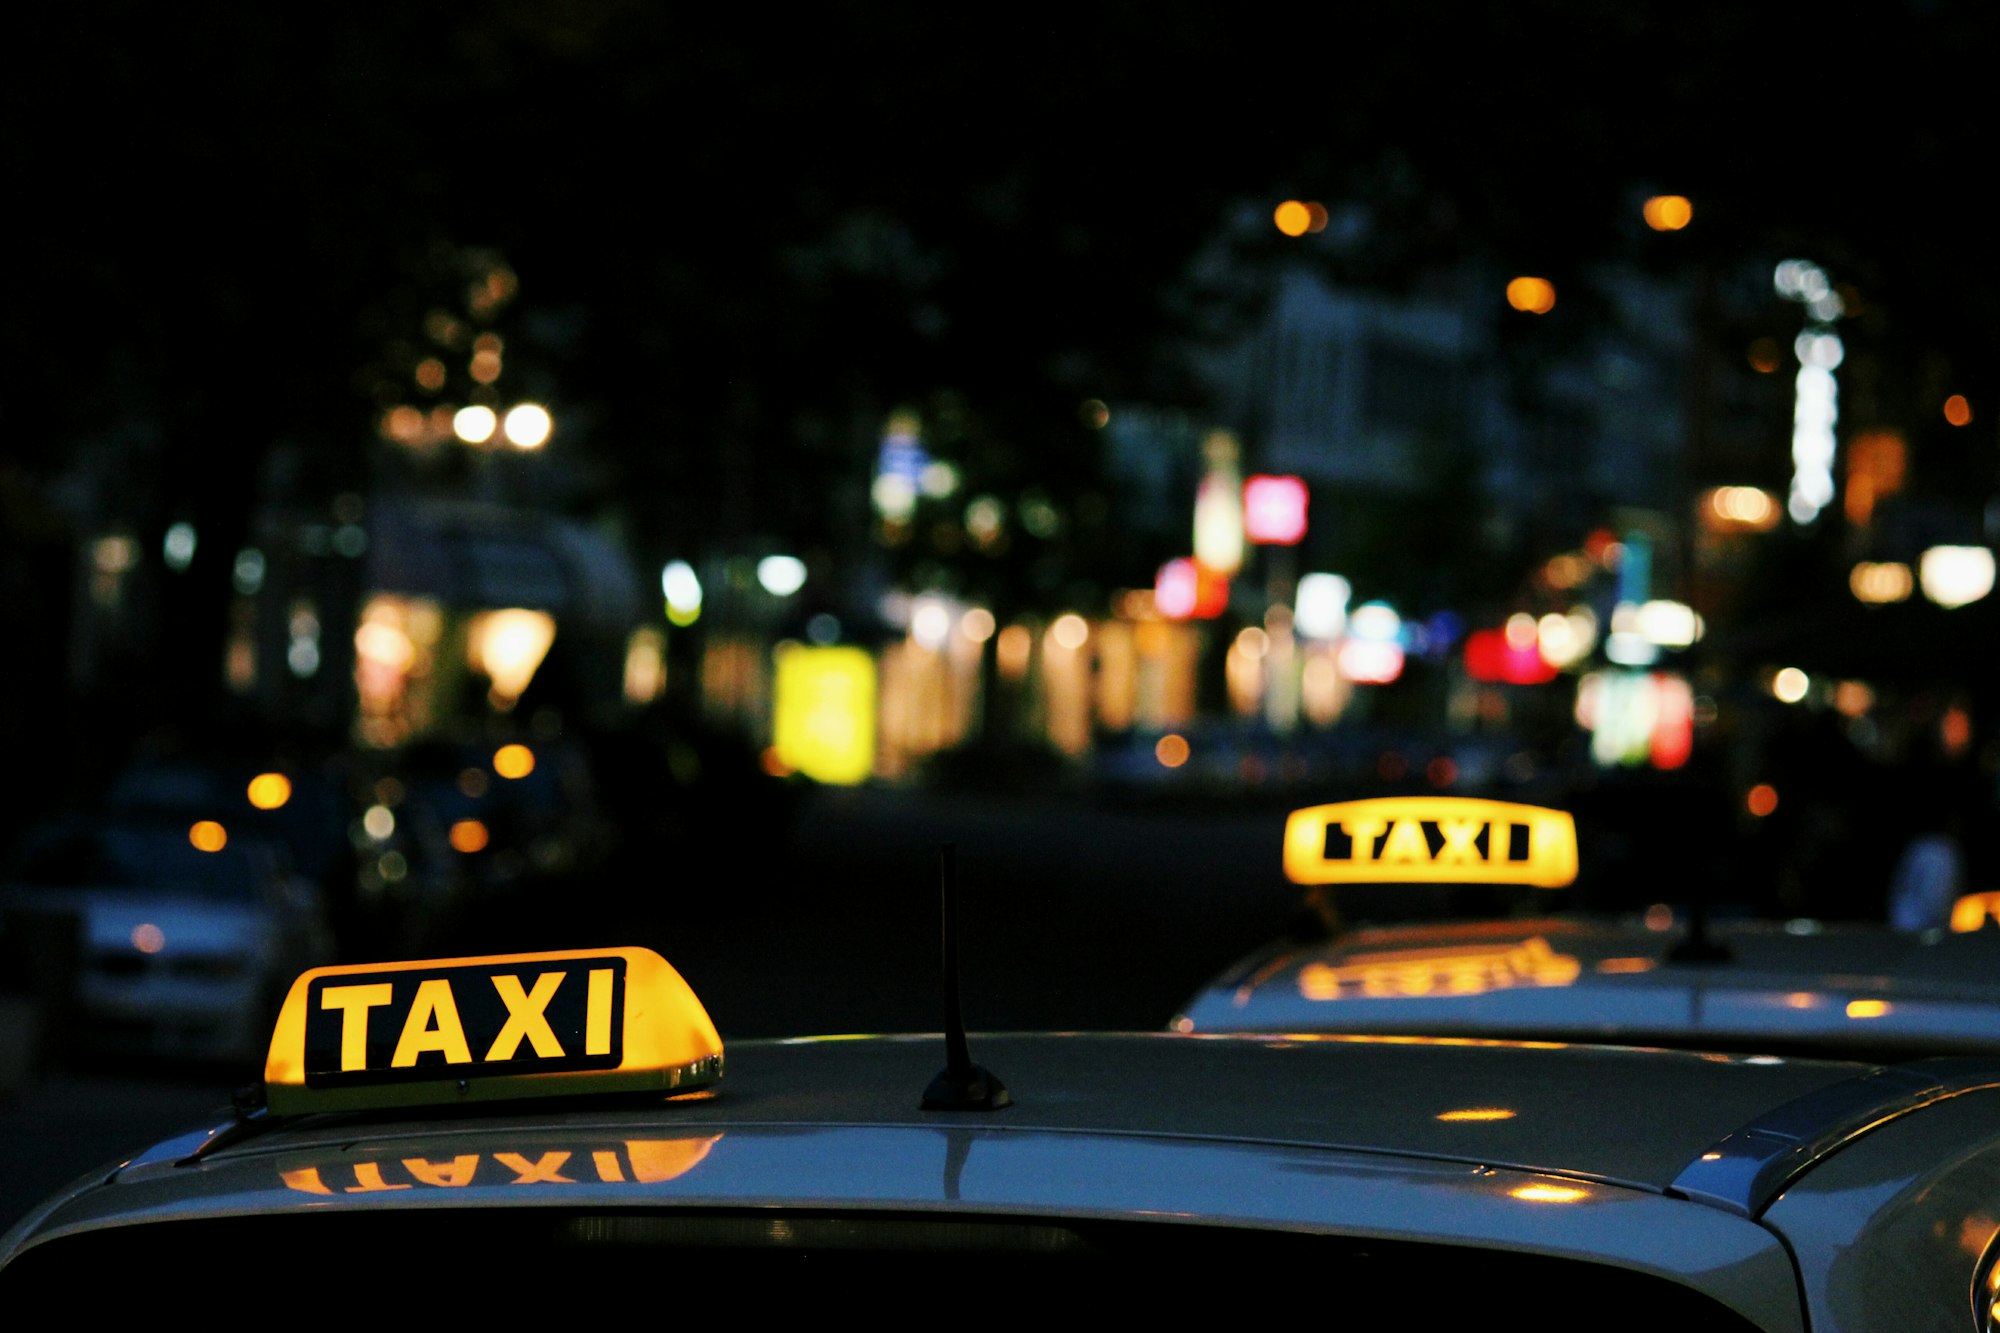 Cab at your fingertips: safe transit via taxi from an app